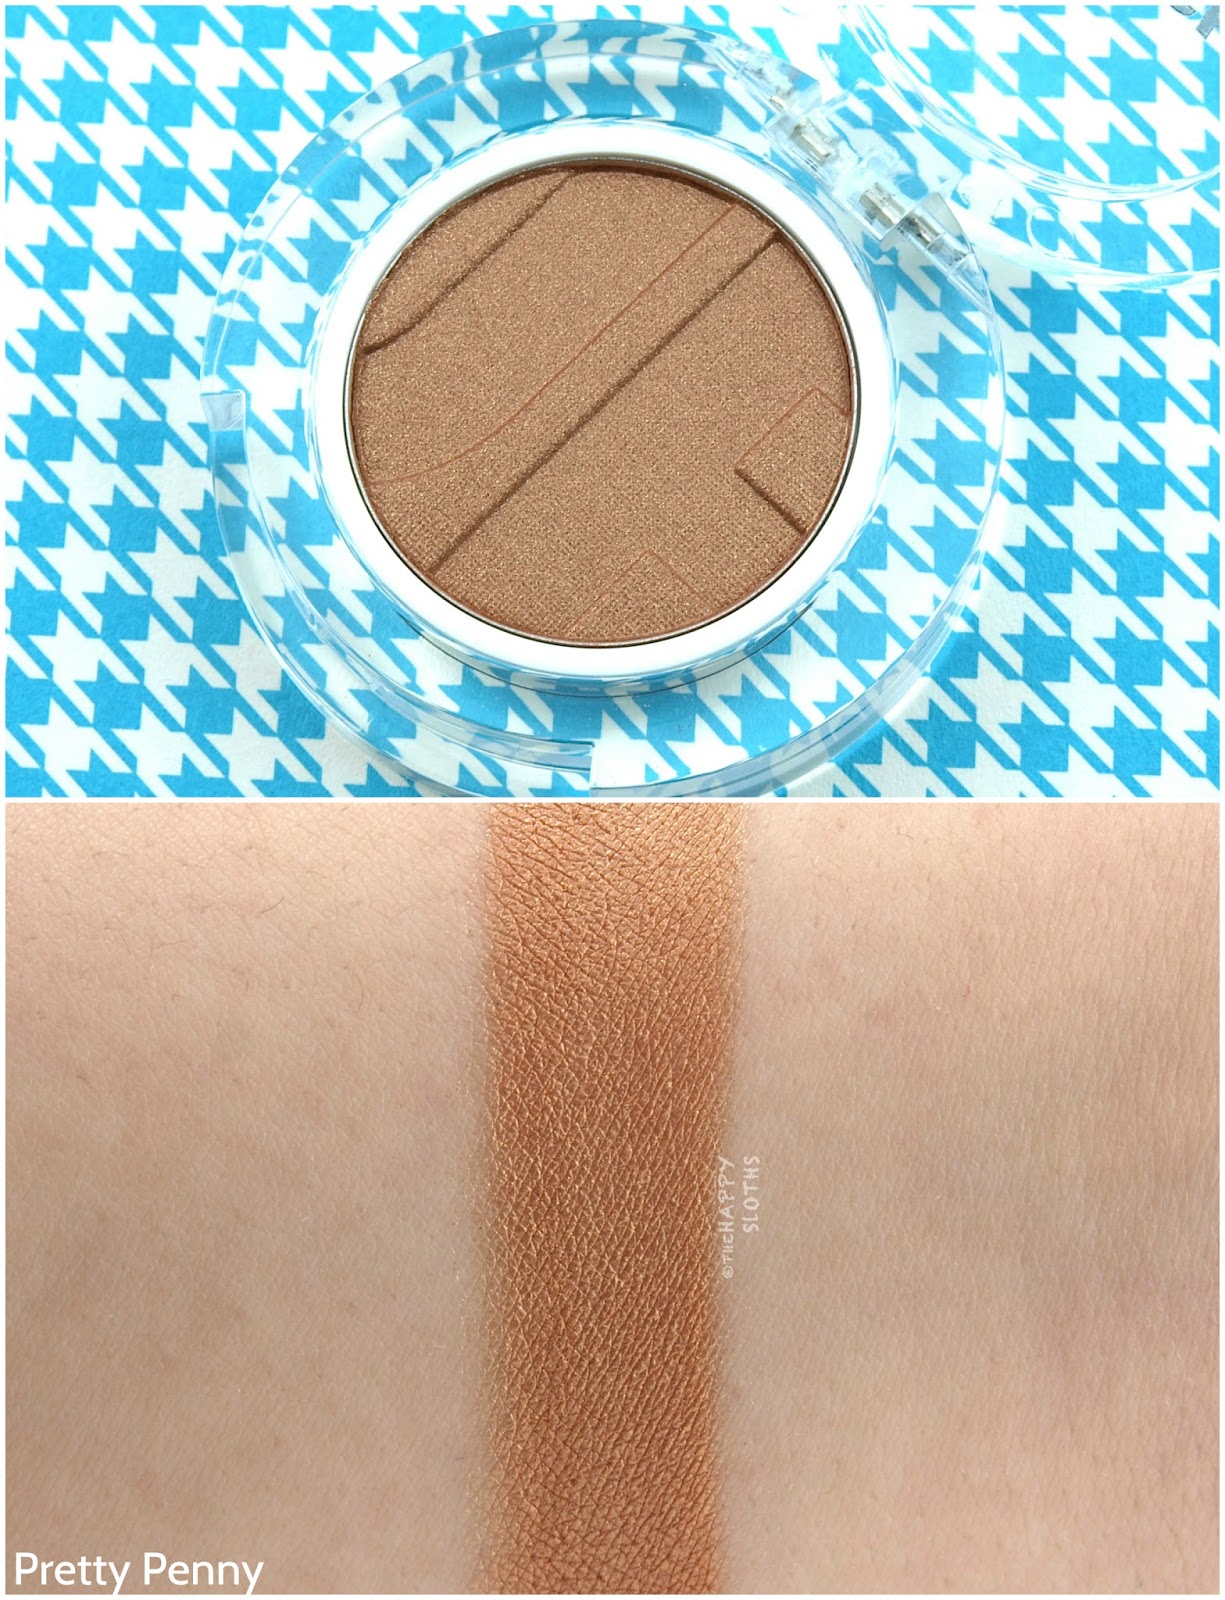 Joe Fresh Beauty Single Eyeshadow in Pretty Penny: Review and Swatches